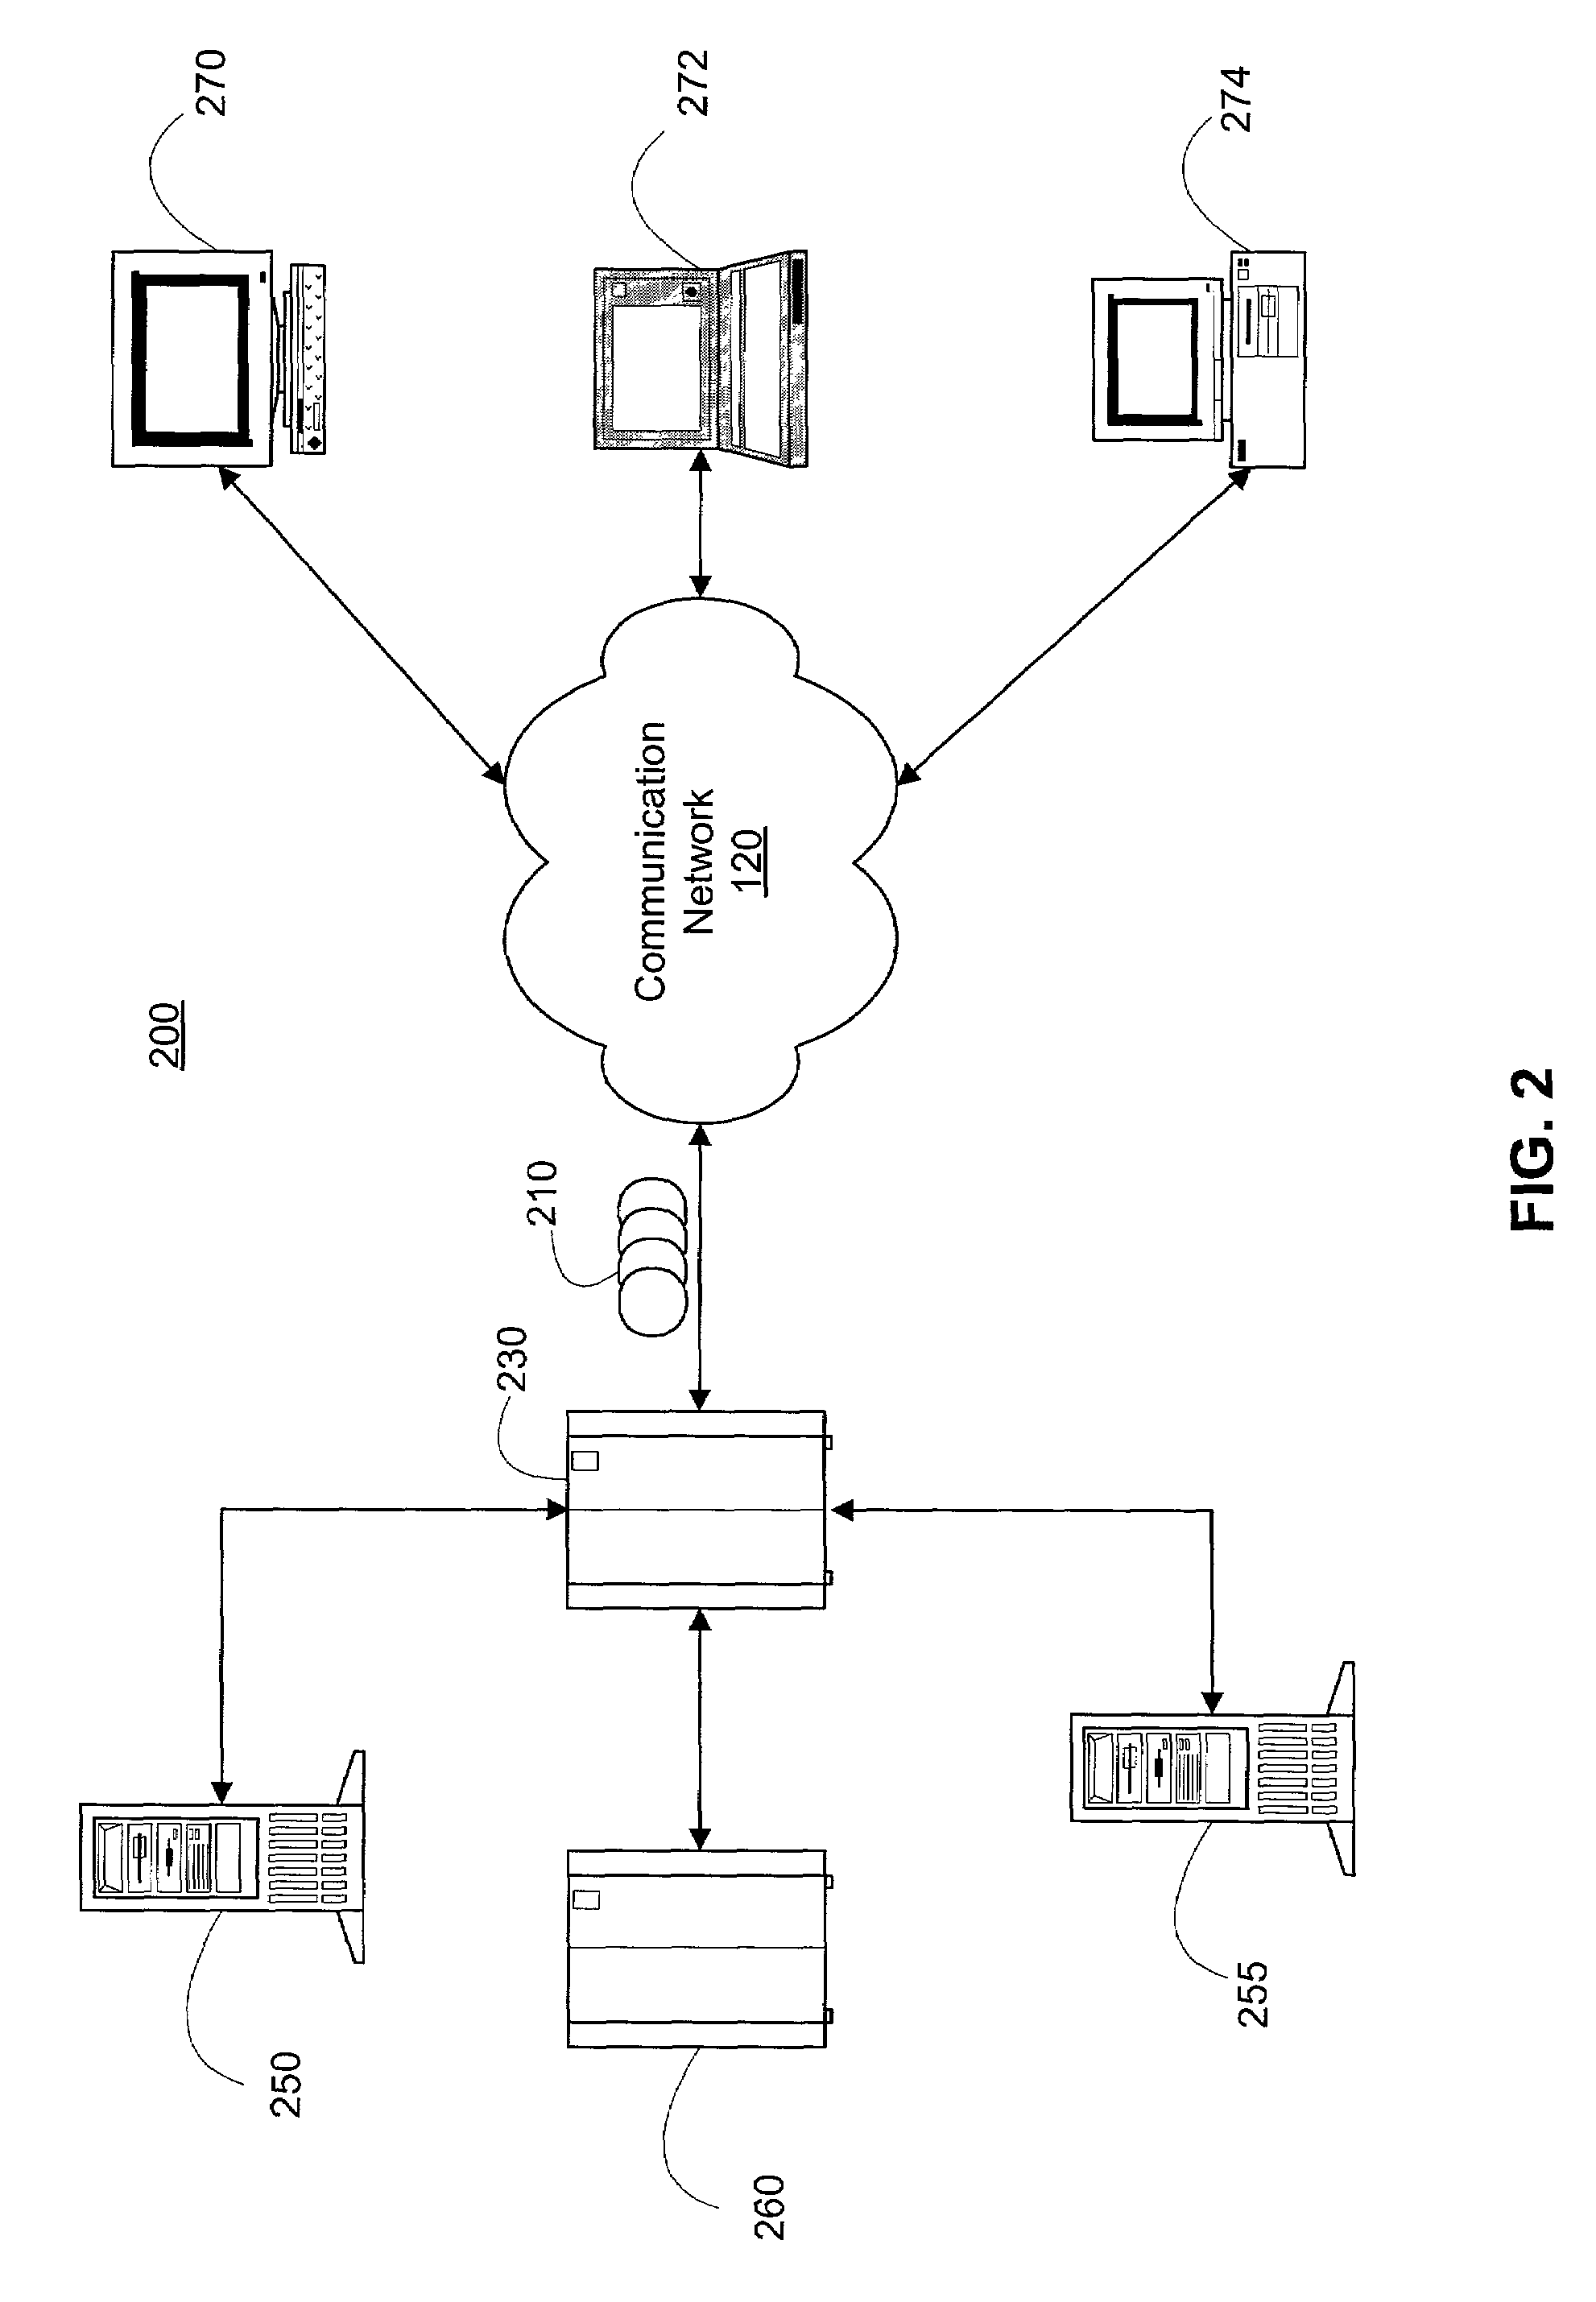 Method and apparatus for dynamically selecting timer durations